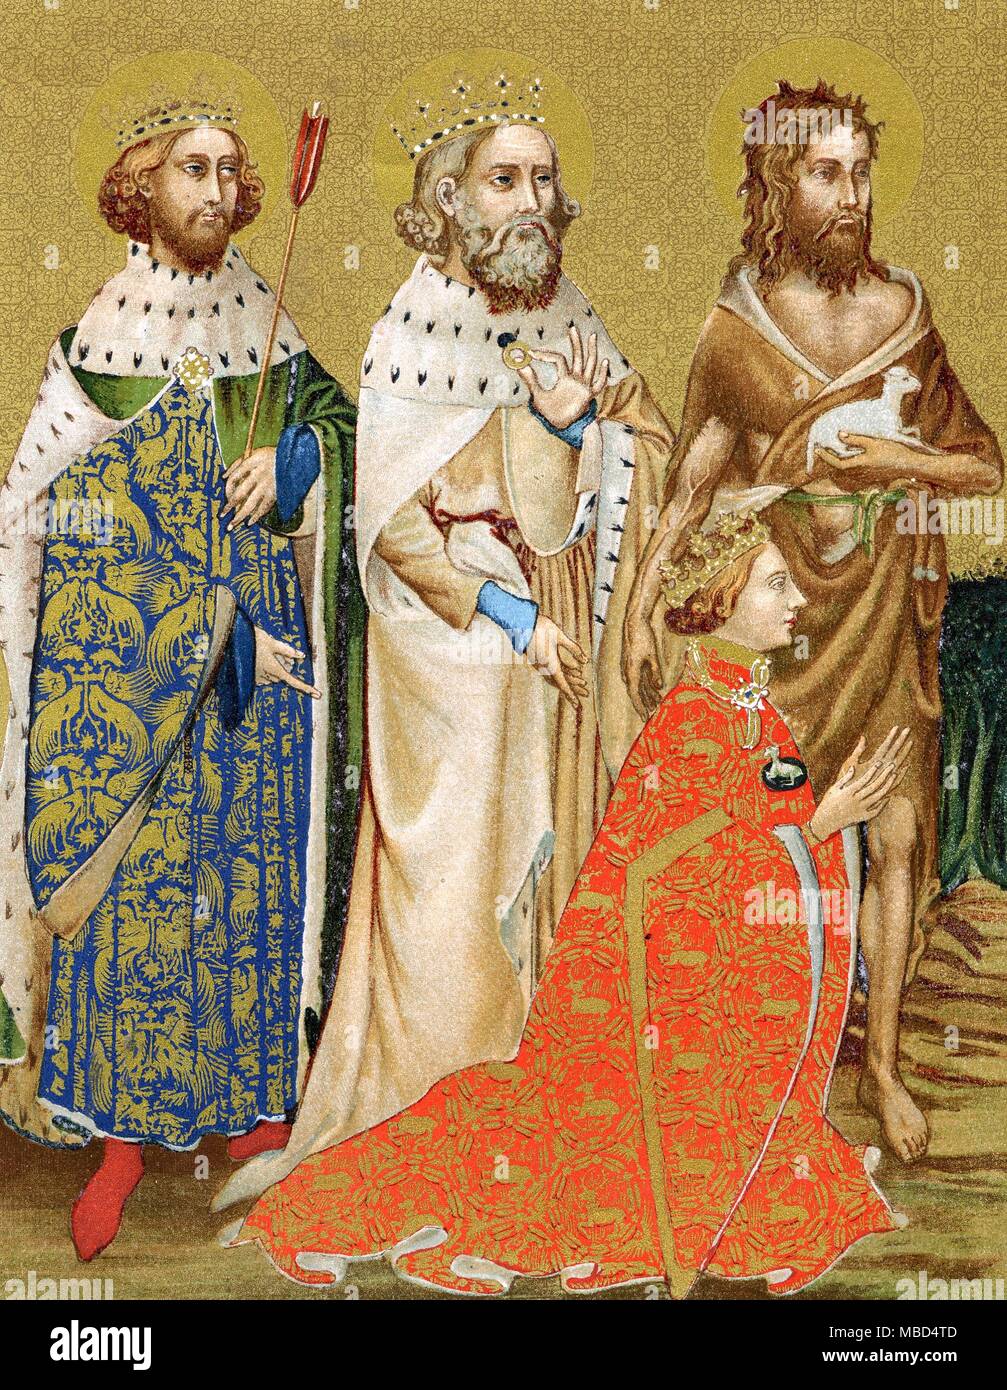 BRITISH HISTORY - RICHARD II OF ENGLAND - SAINTS The kneeling King Richard is backed by his patron saints. Arundel lithograph of the 19th century, based on the diptych in the National Gallery, London. Stock Photo